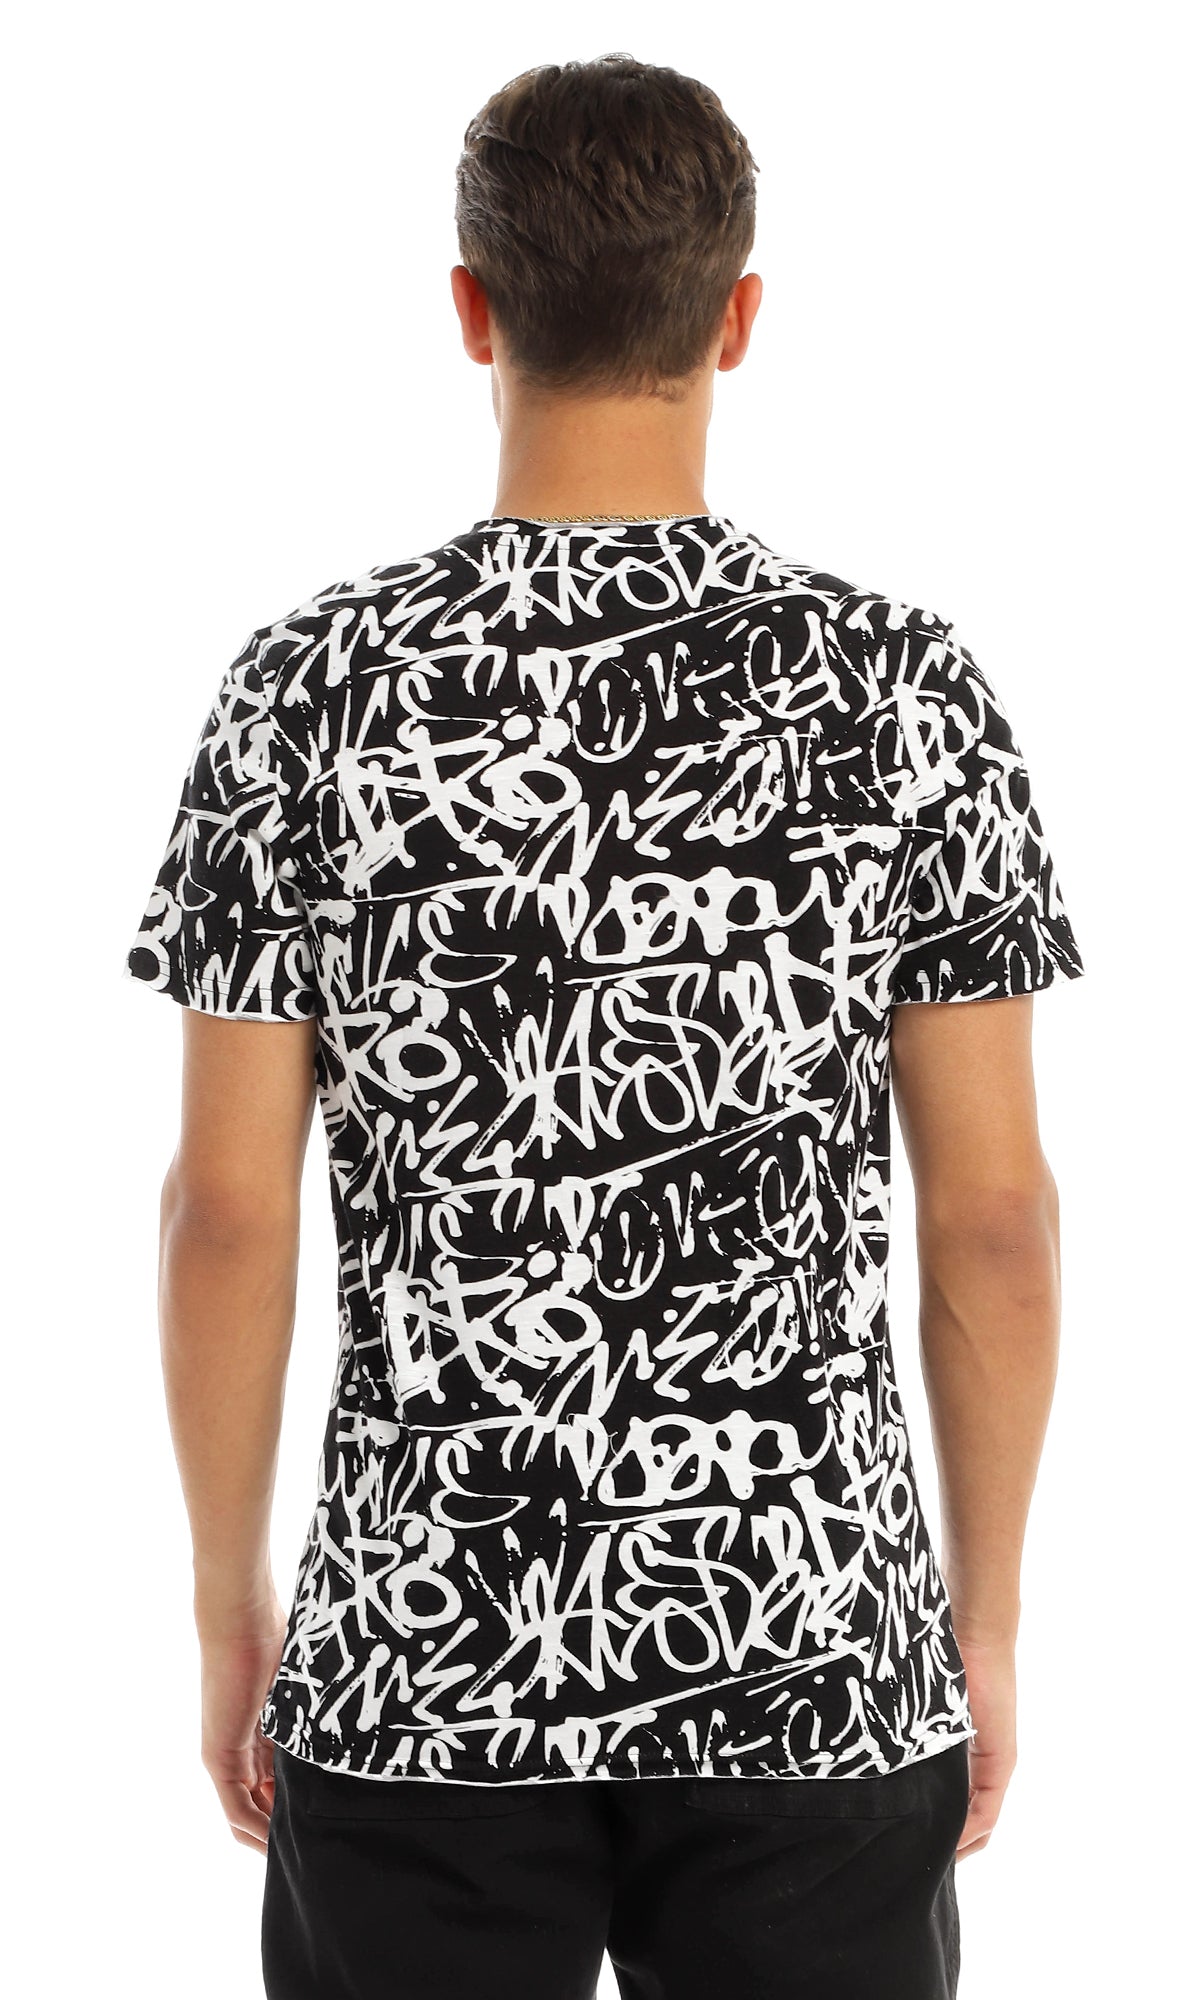 97180 All Over Patterned Round Black & White T-Shirt